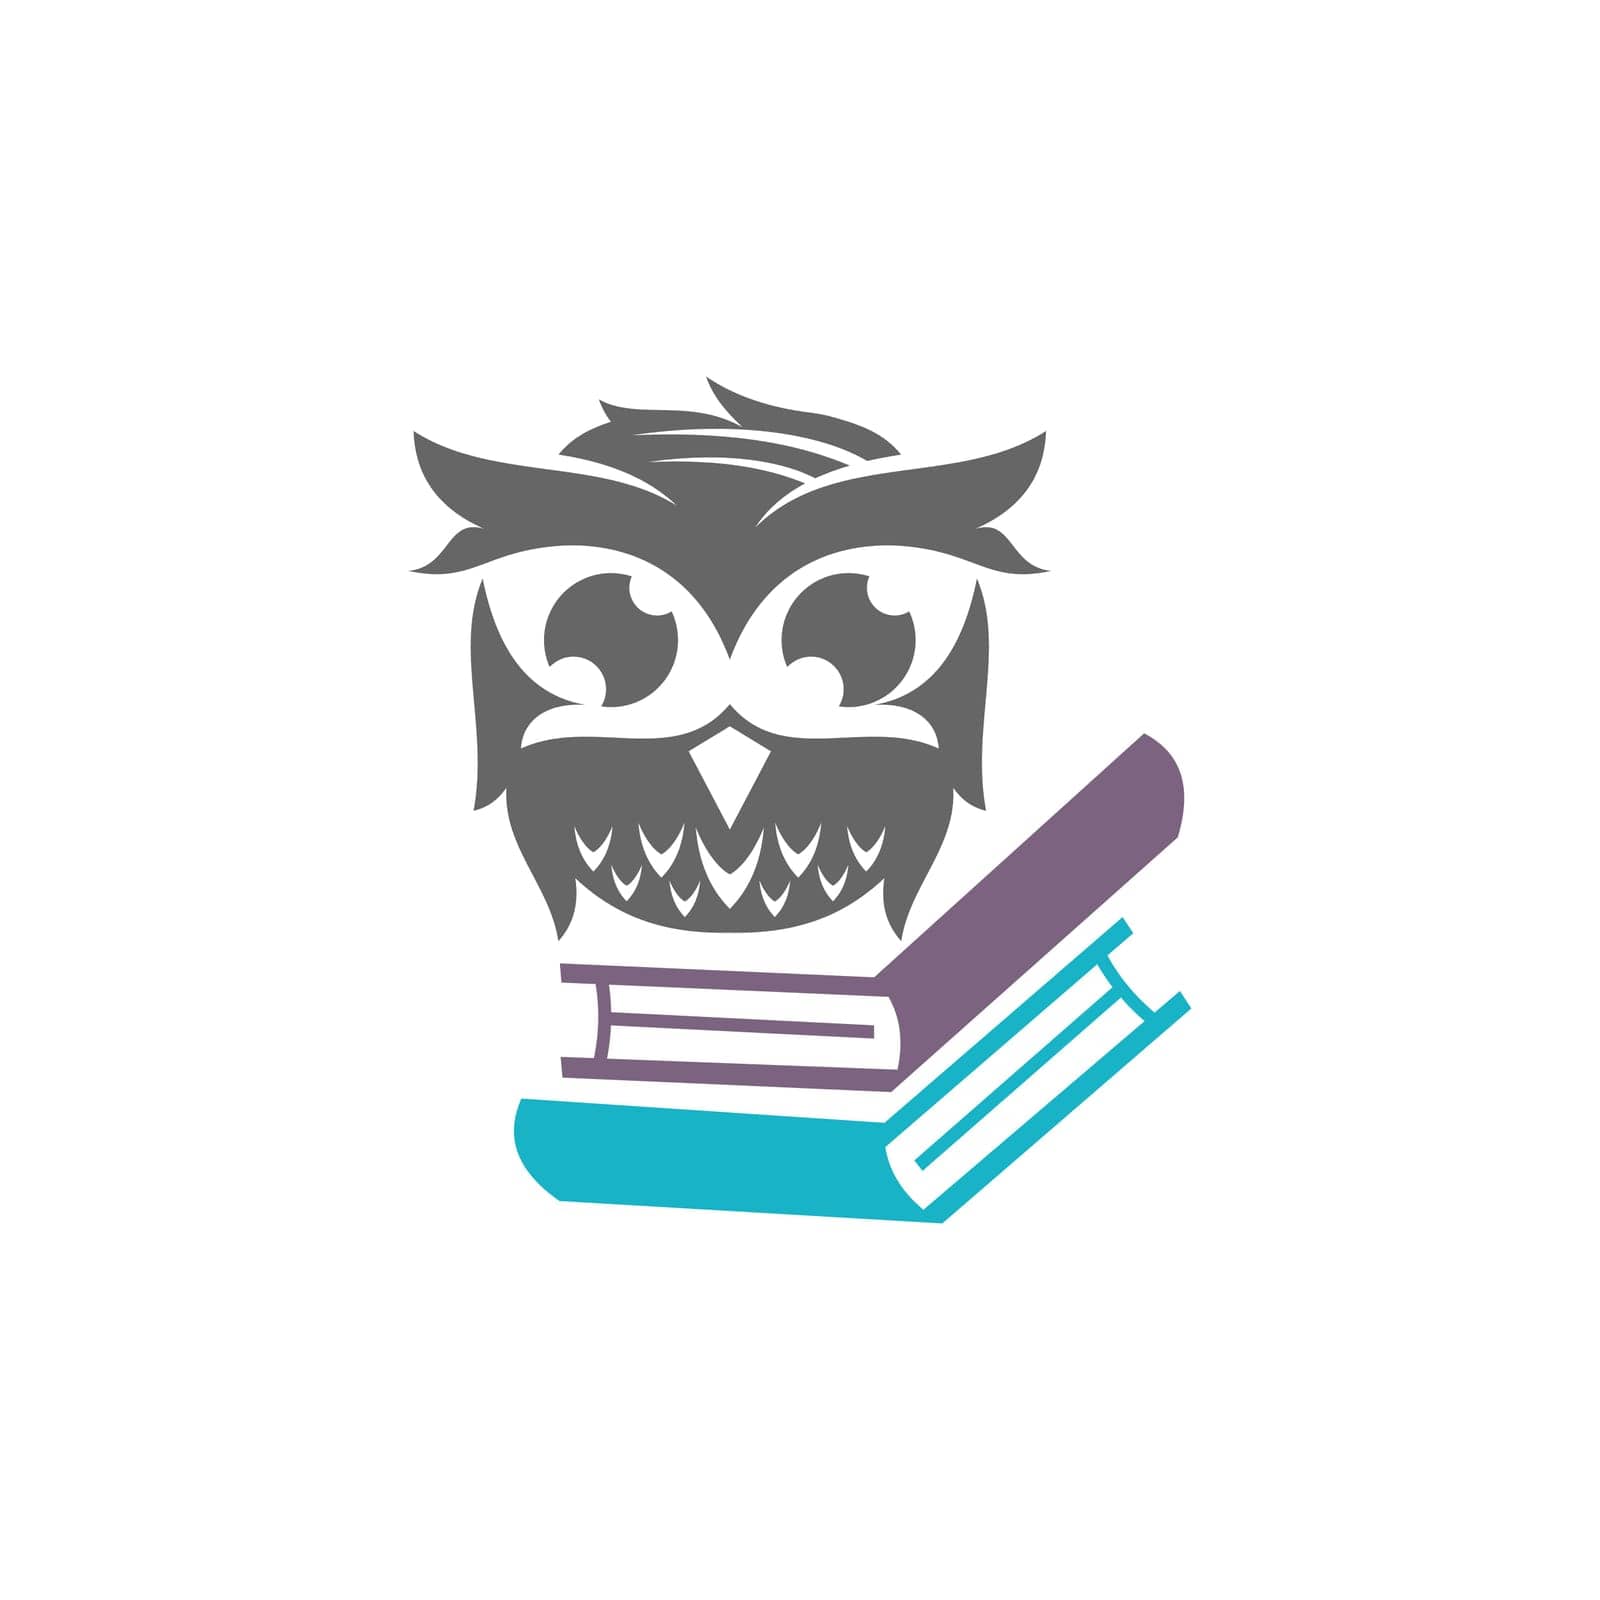 Owl Book Literature Logo Design Vector Template Isolated by alluranet